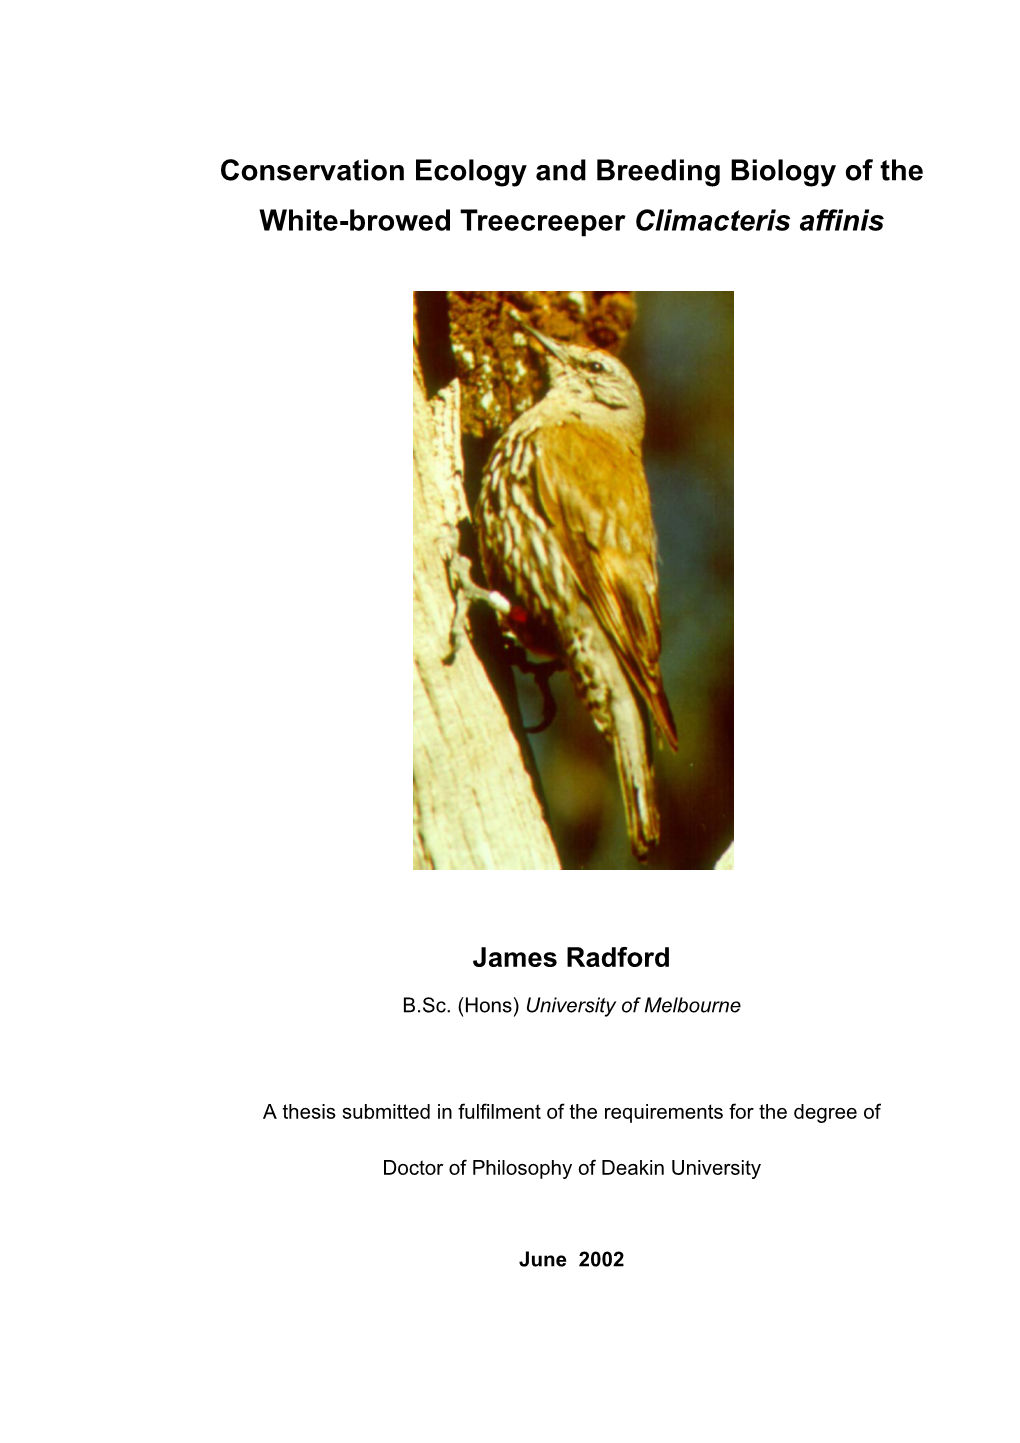 Conservation Ecology and Breeding Biology of the White-Browed Treecreeper Climacteris Affinis